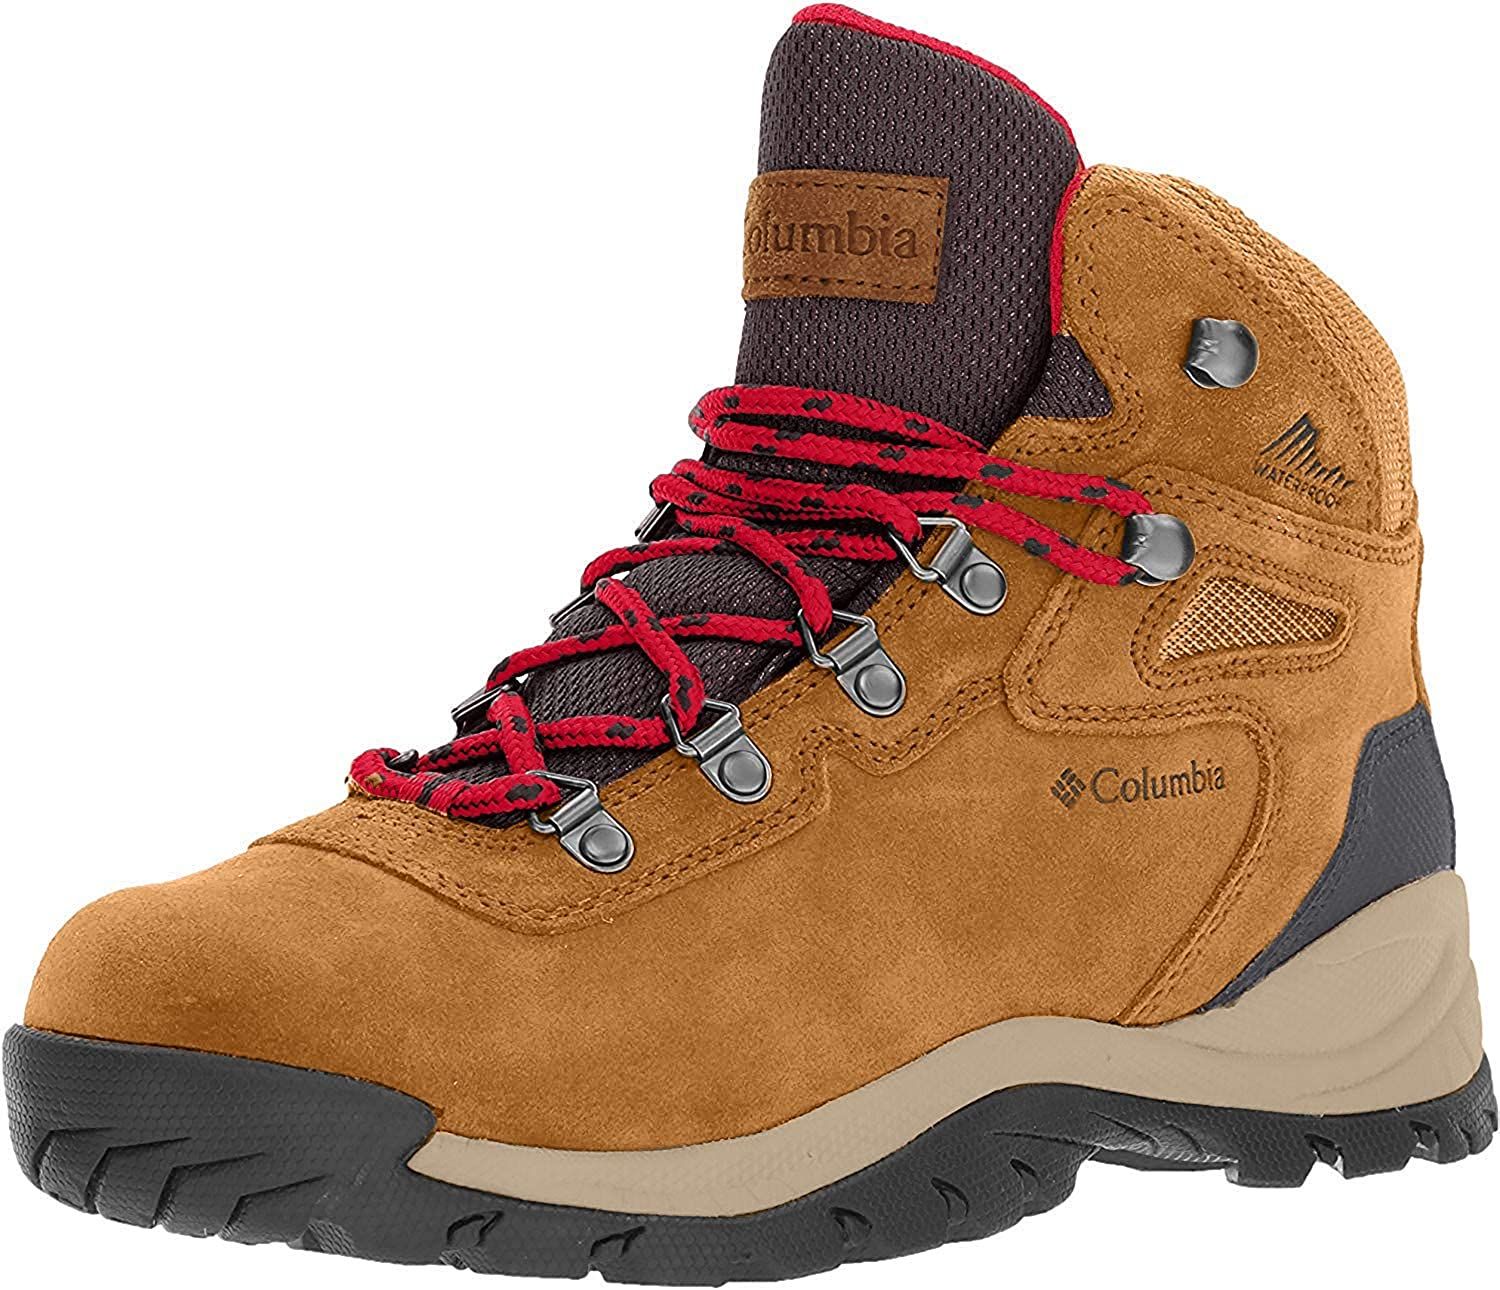 10 Best Hiking Shoes of 2021 — ReviewThis